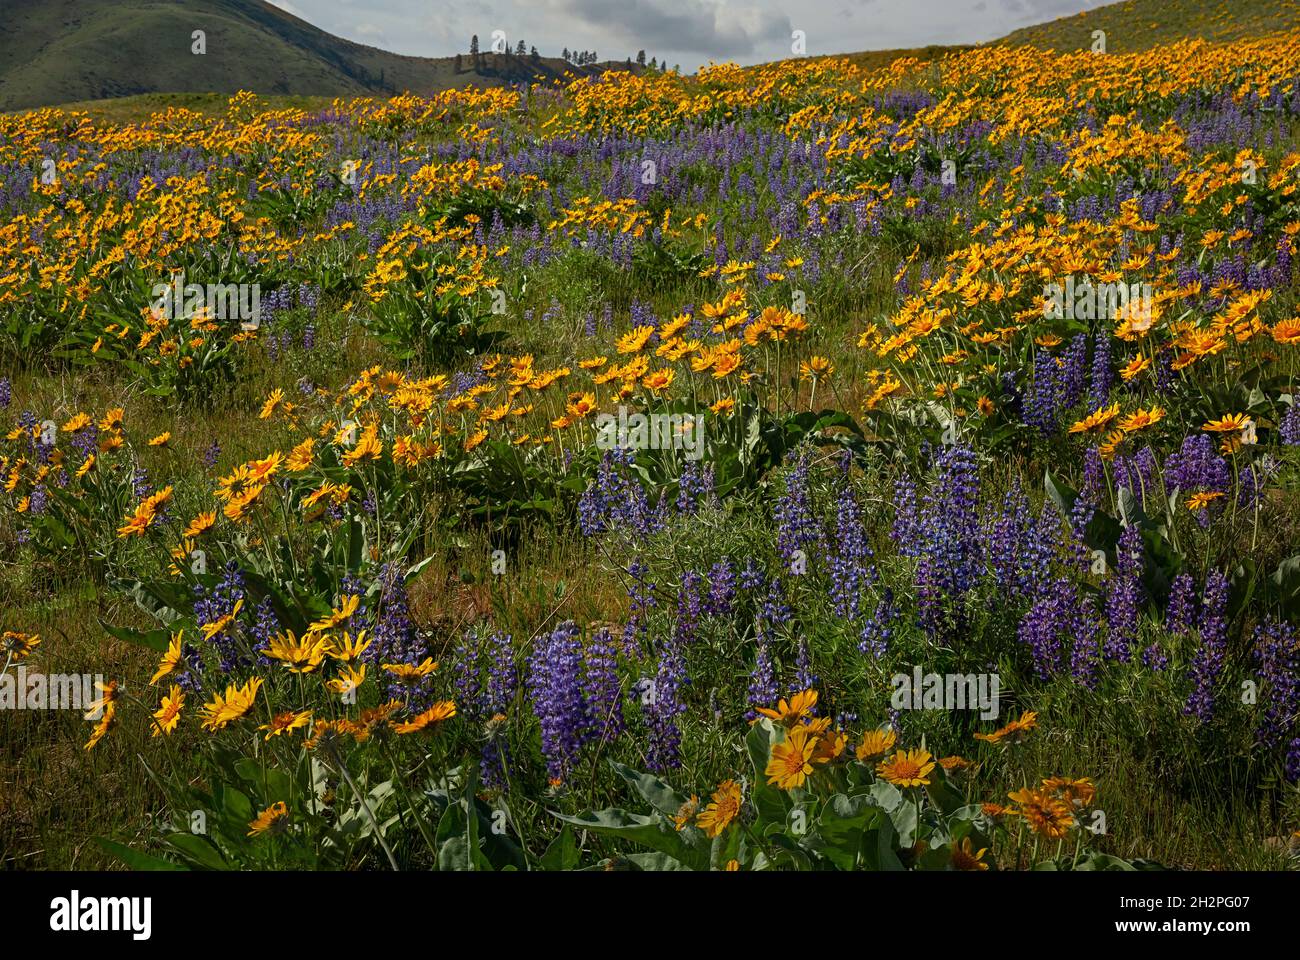 WA19711-00...WASHINGTON - Balsamroot and lupine blooming along the Sage Hills Trail above the town of Wenatchee. Stock Photo